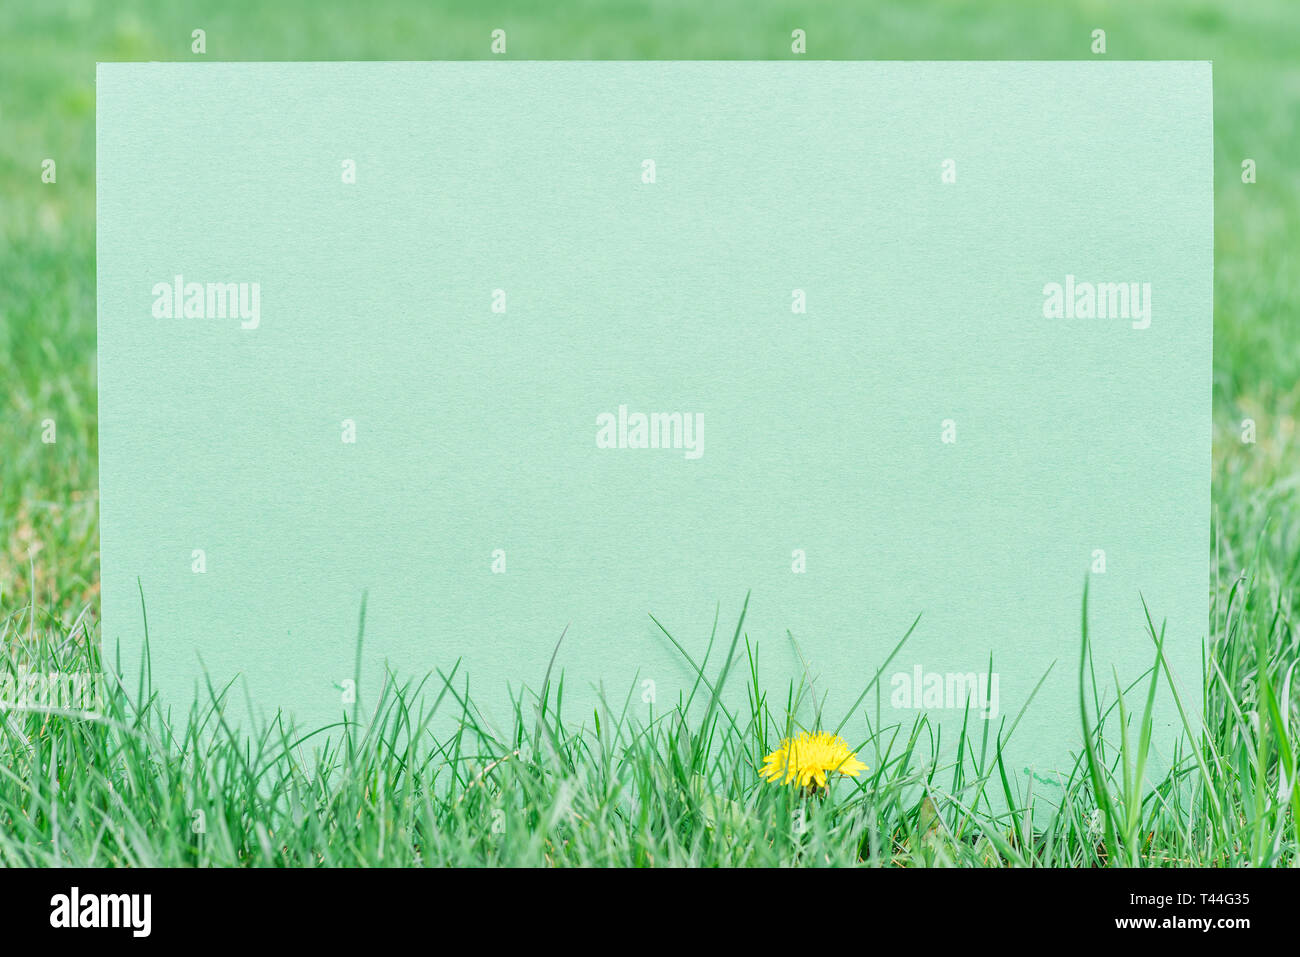 Paper blank on the green grass. Green grass as a frame. Stock Photo